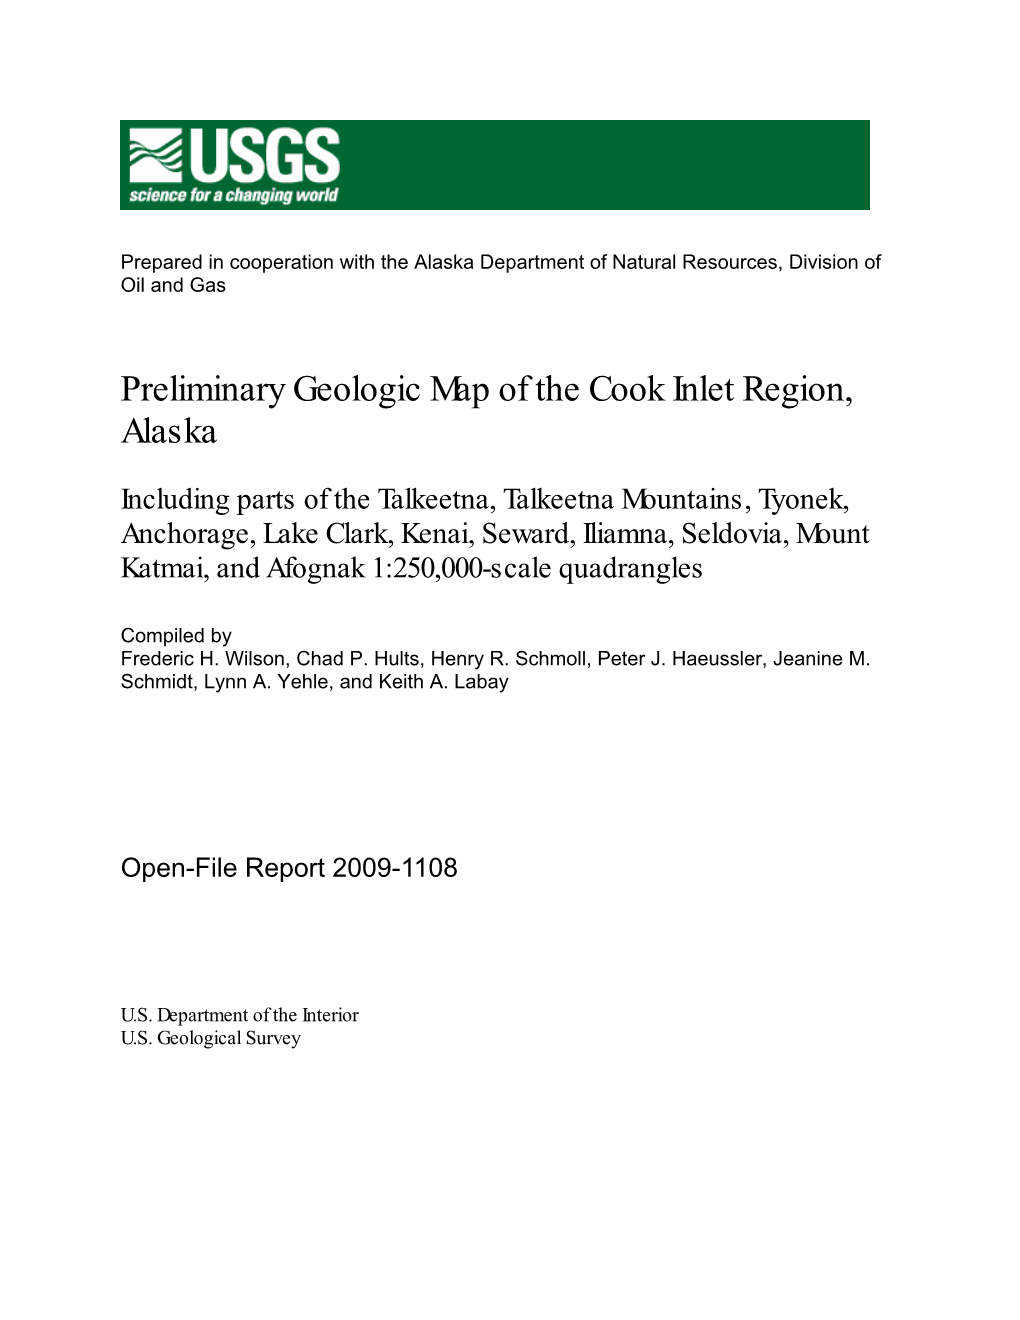 Preliminary Geologic Map of the Cook Inlet Region, Alaska